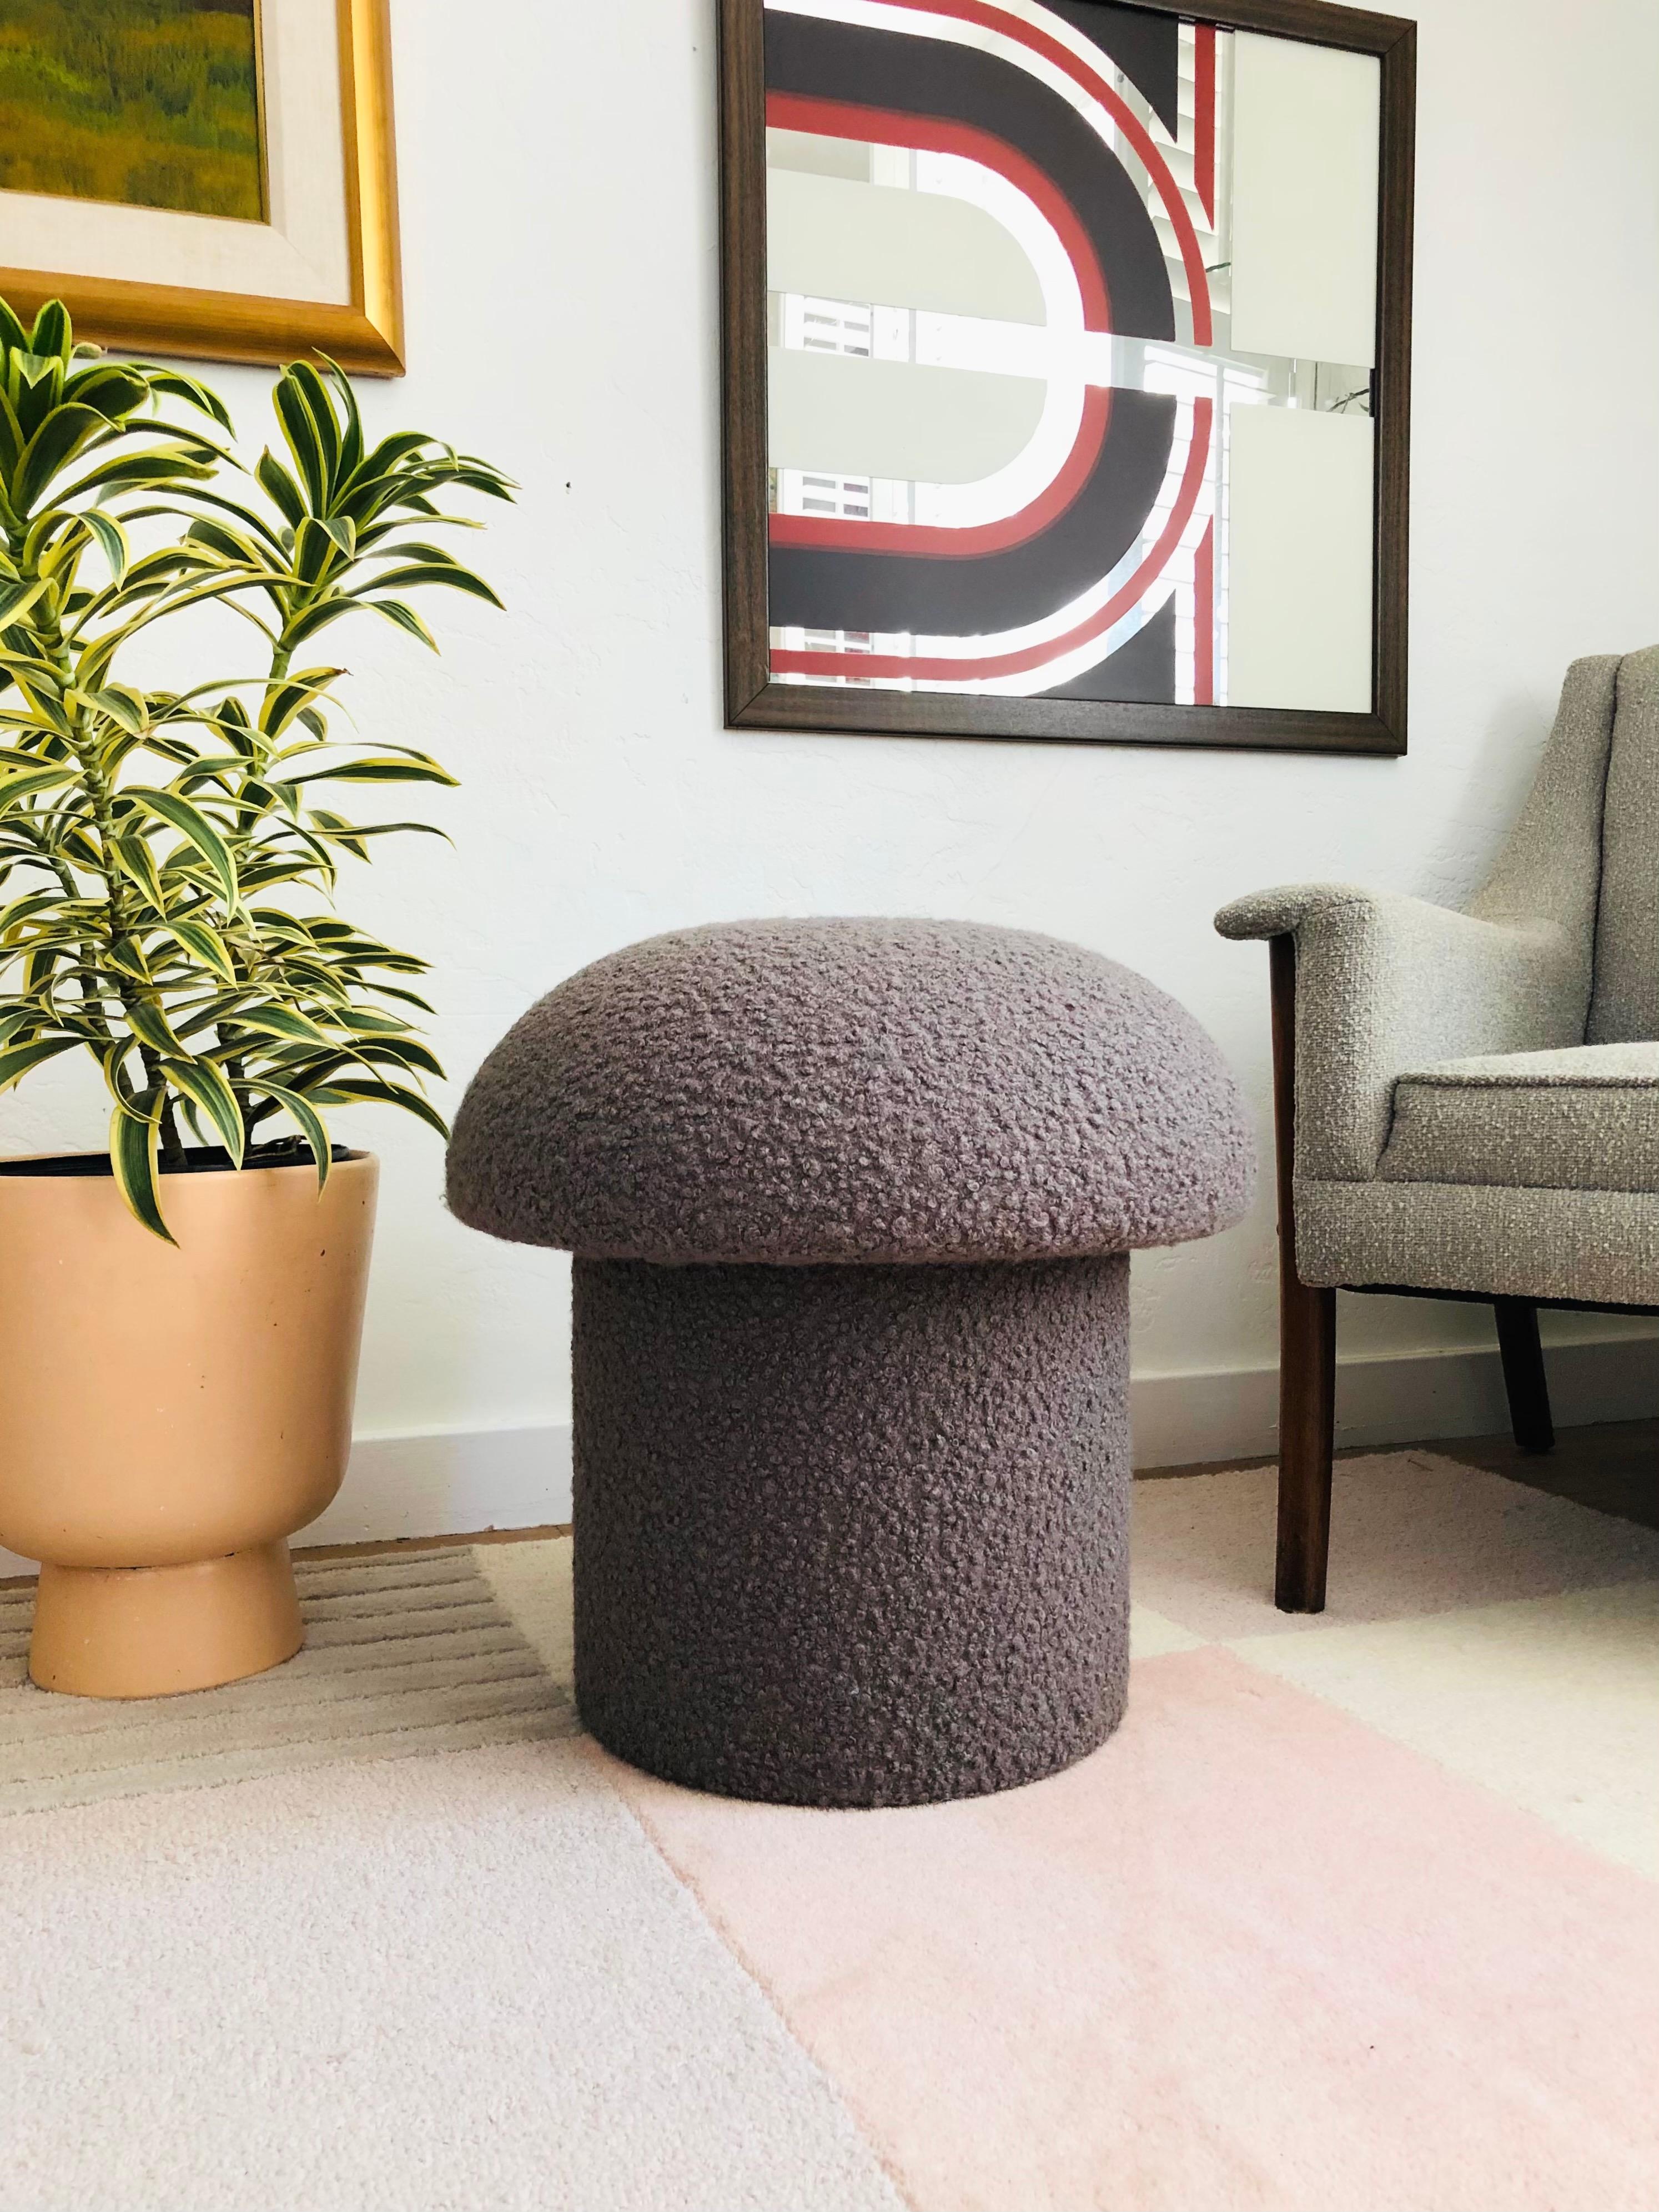 A handmade mushroom shaped ottoman, upholstered in a gray curly boucle fabric. Perfect for using as a footstool or extra occasional seating. A comfortable cushioned seat and sculptural accent piece.
Mushroom ottomans are made to order,